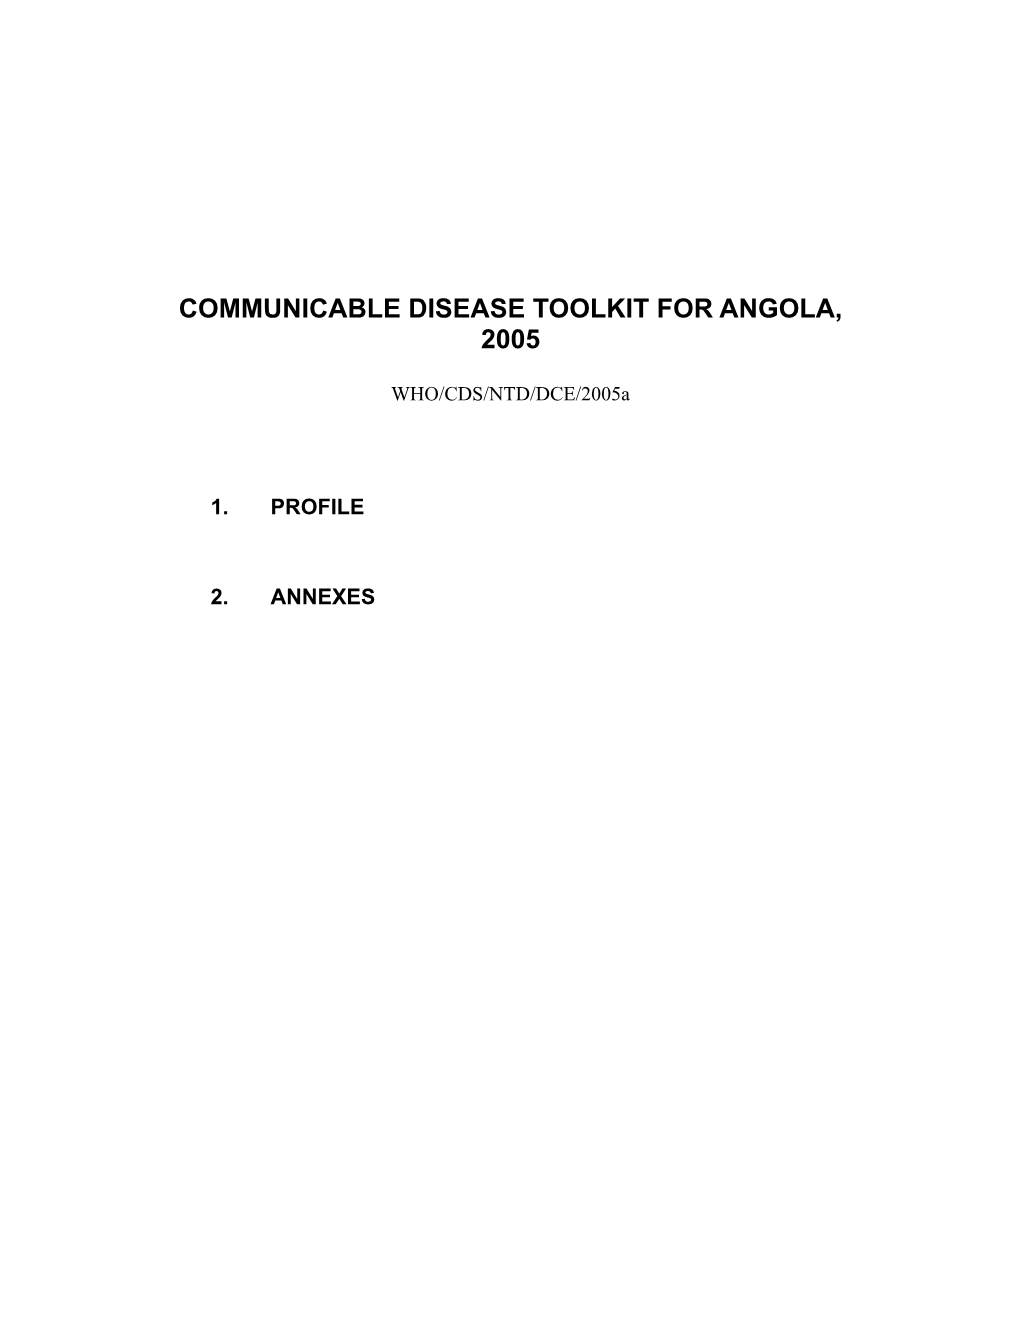 Communicable Disease Toolkit for Angola, 2005